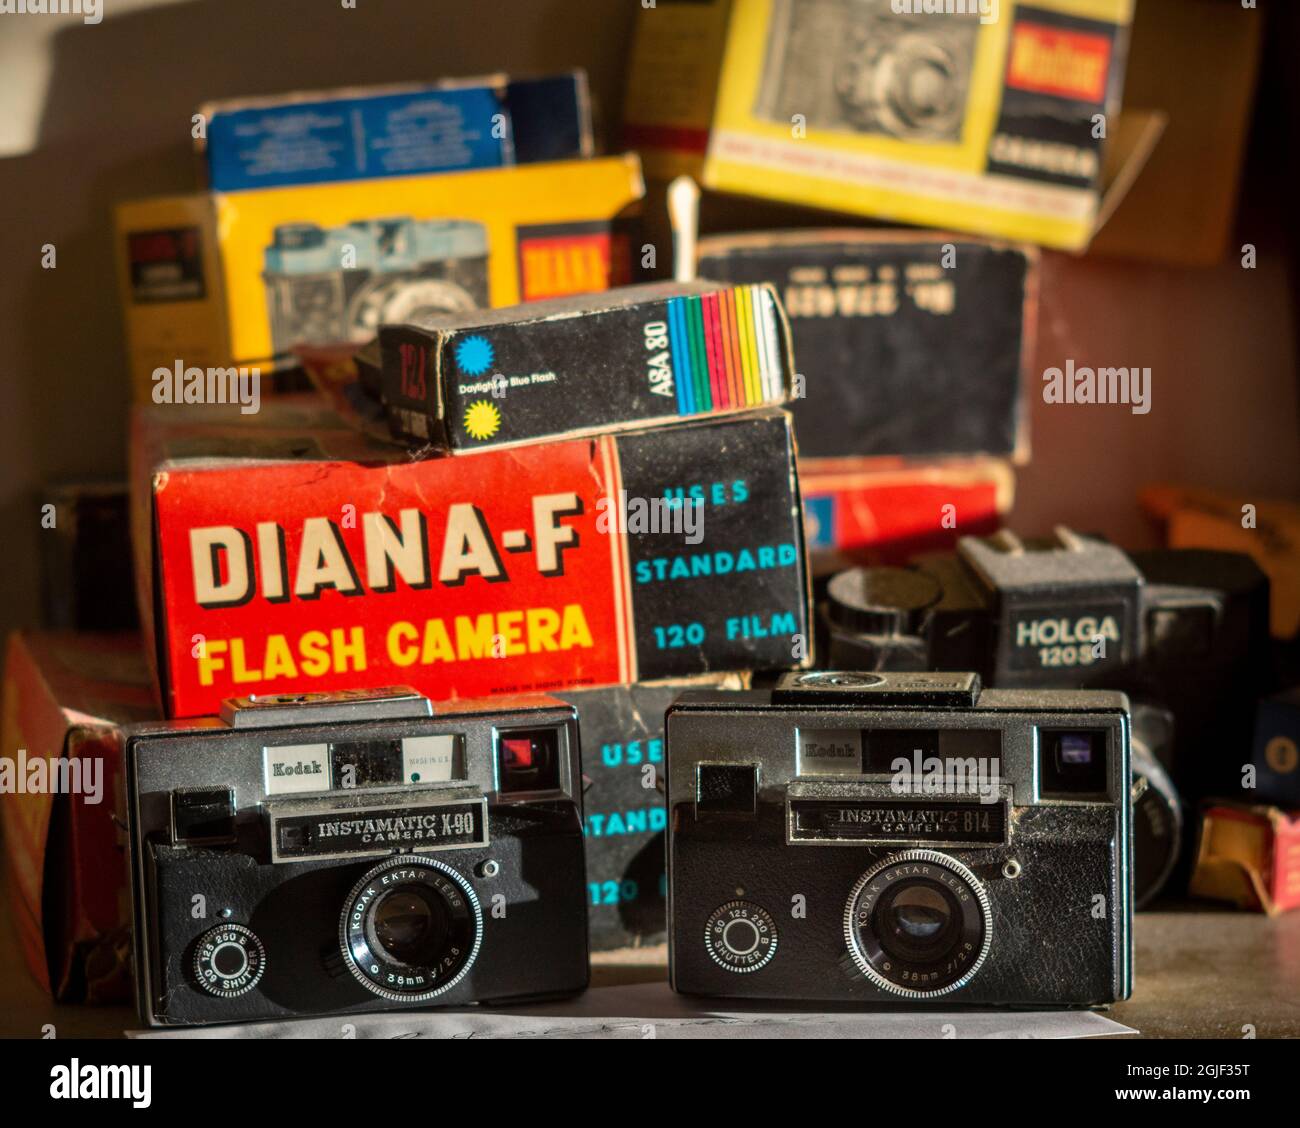 A collection of vintage cameras including Eastman Kodak Co. Instamatic 814 and X-90 cameras as well as assorted Holga and Dianas, seen on Friday, September 3, 2021 (© Richard B. Levine) Stock Photo